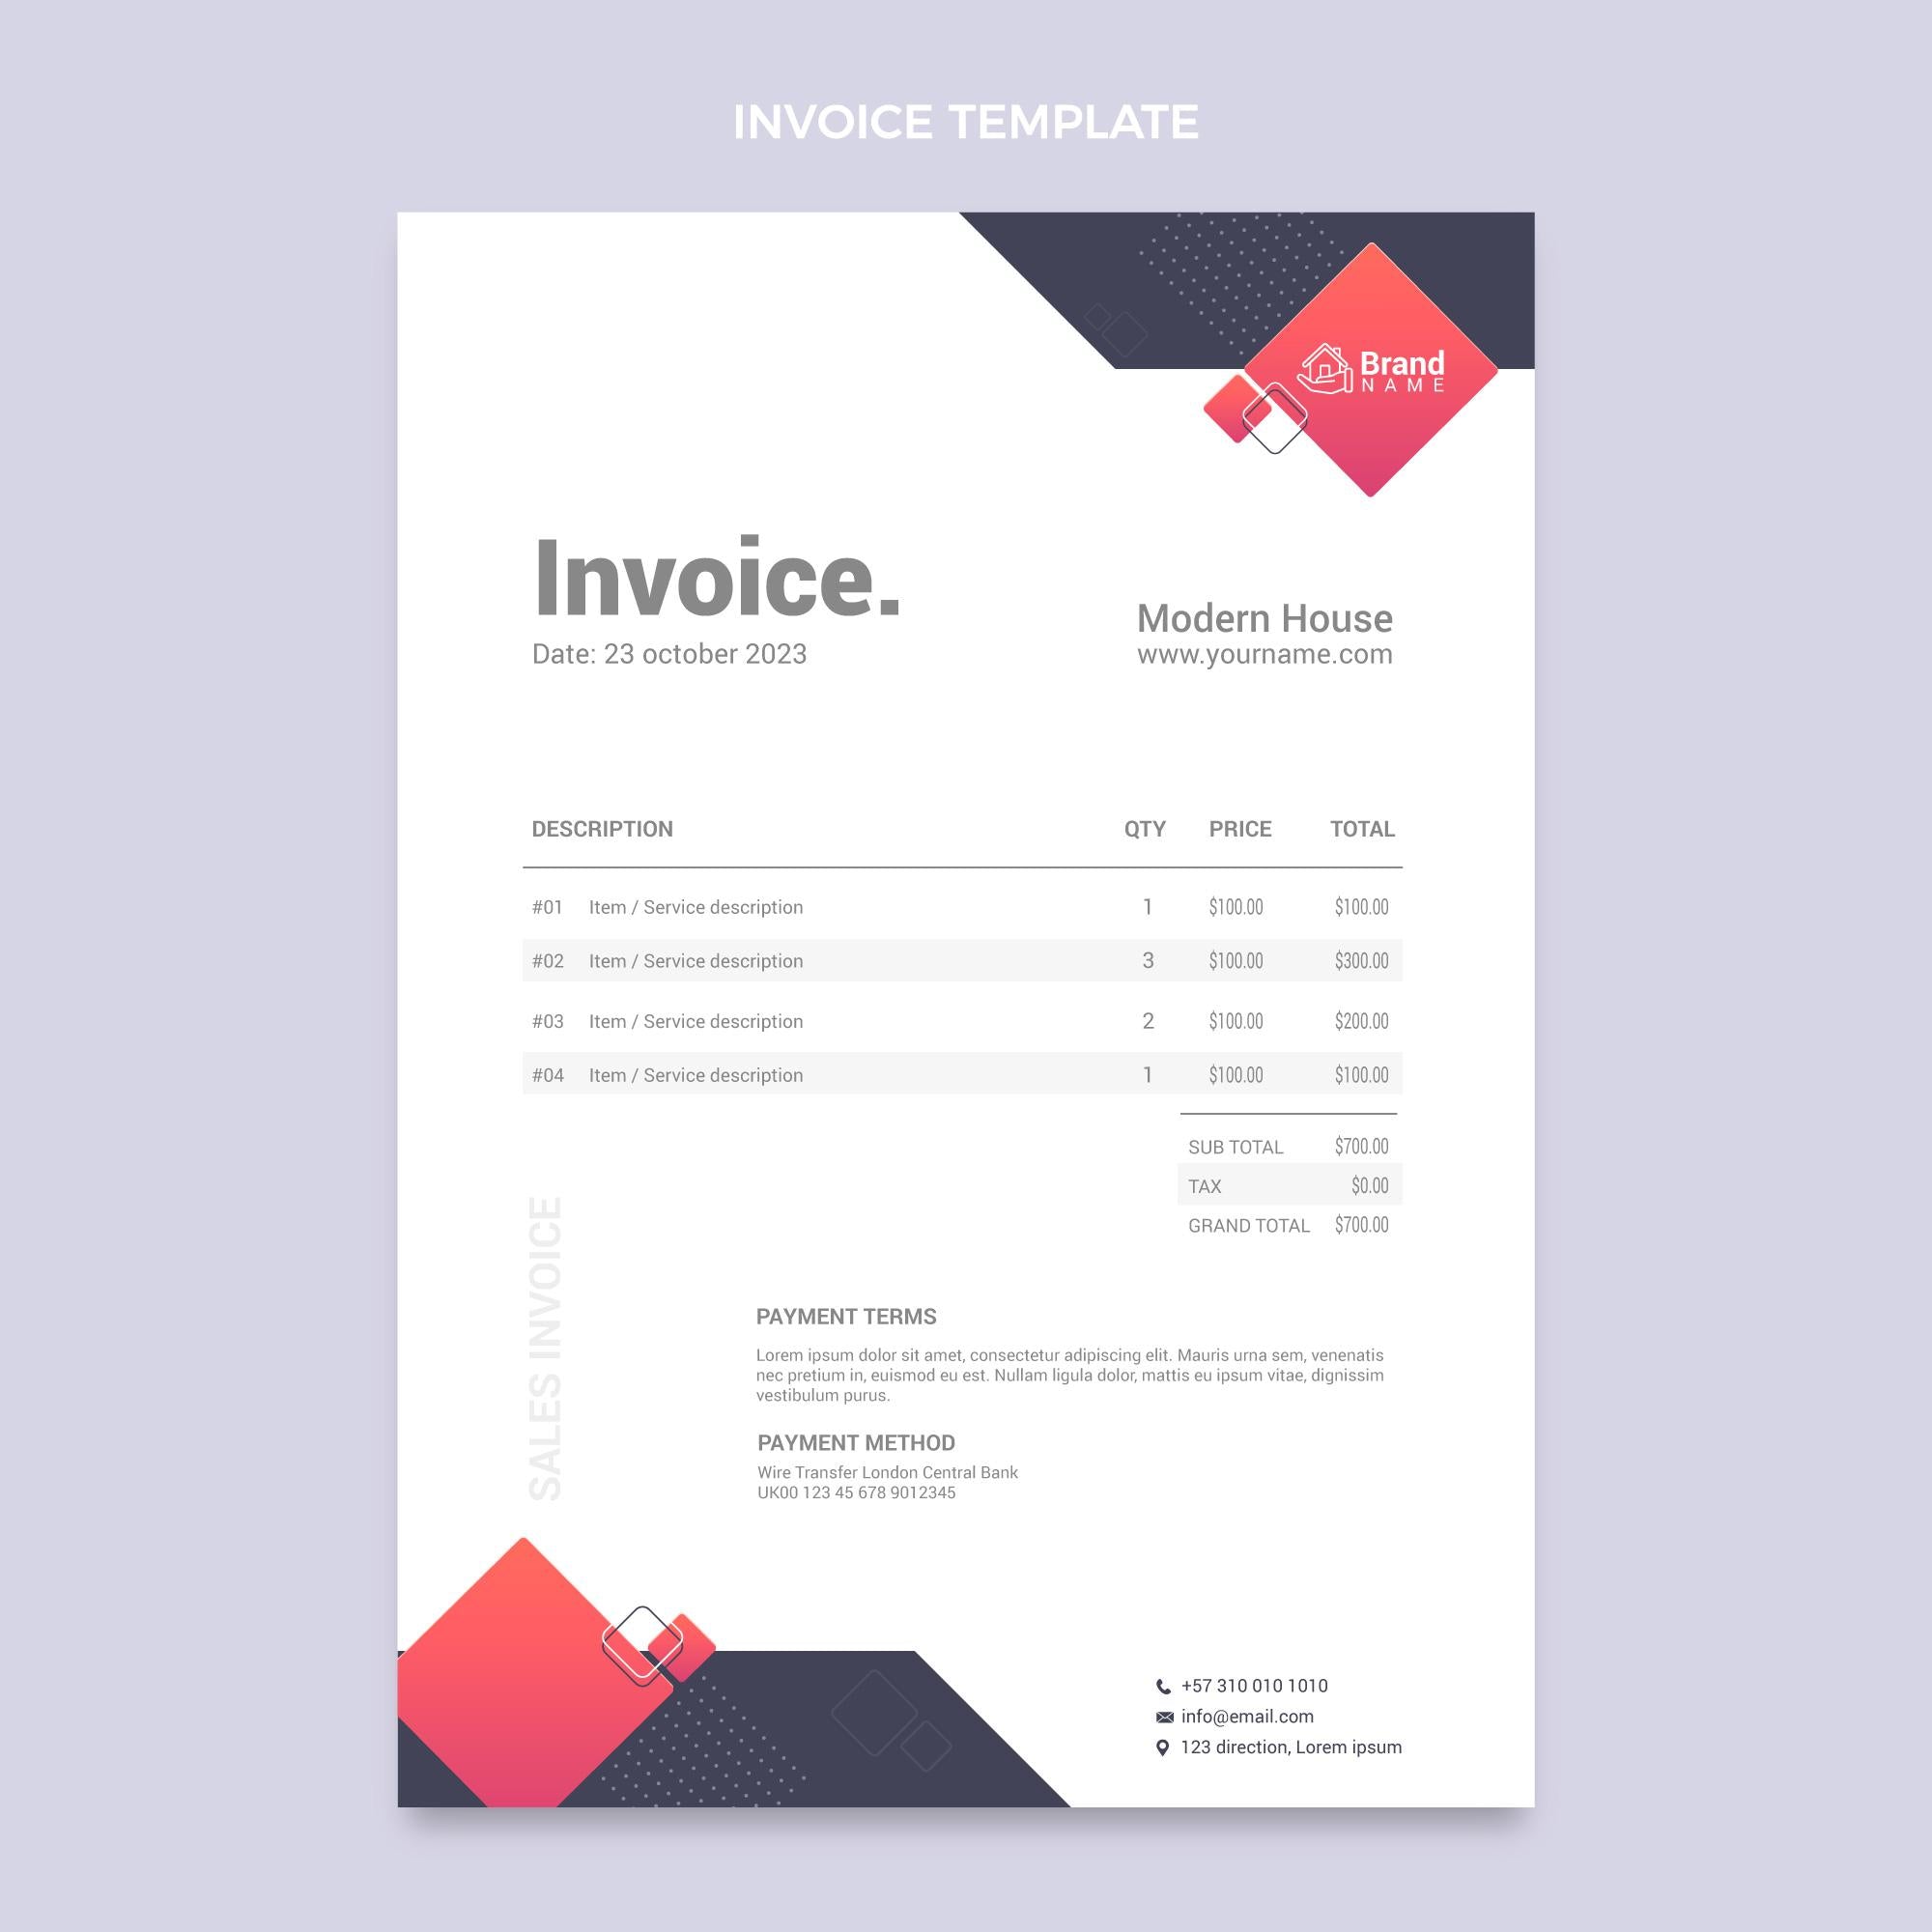 MG Invoice Template V1 for Excel